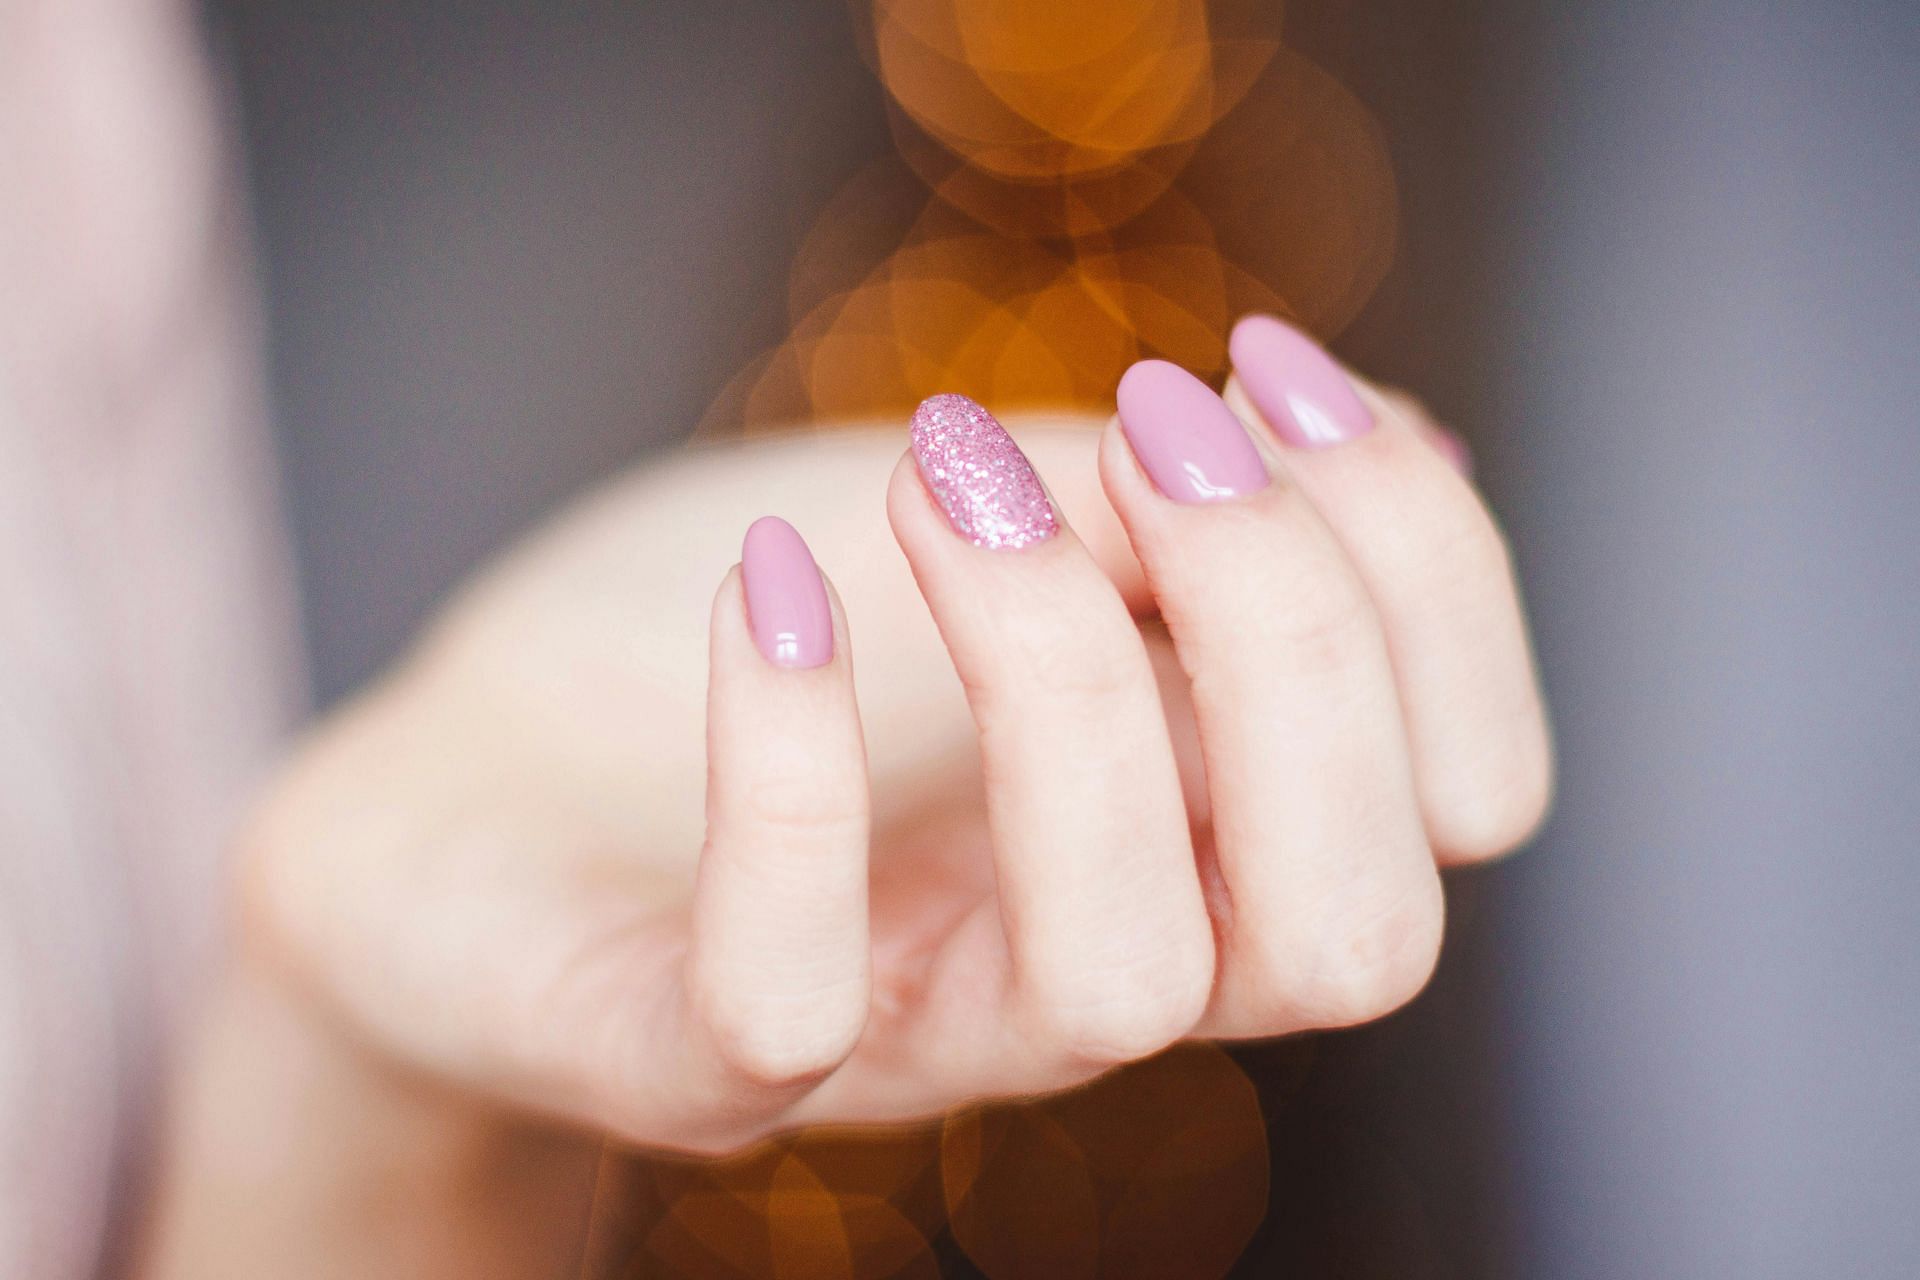 tips to stop picking nails (image sourced via Pexels / Photo by valeria)